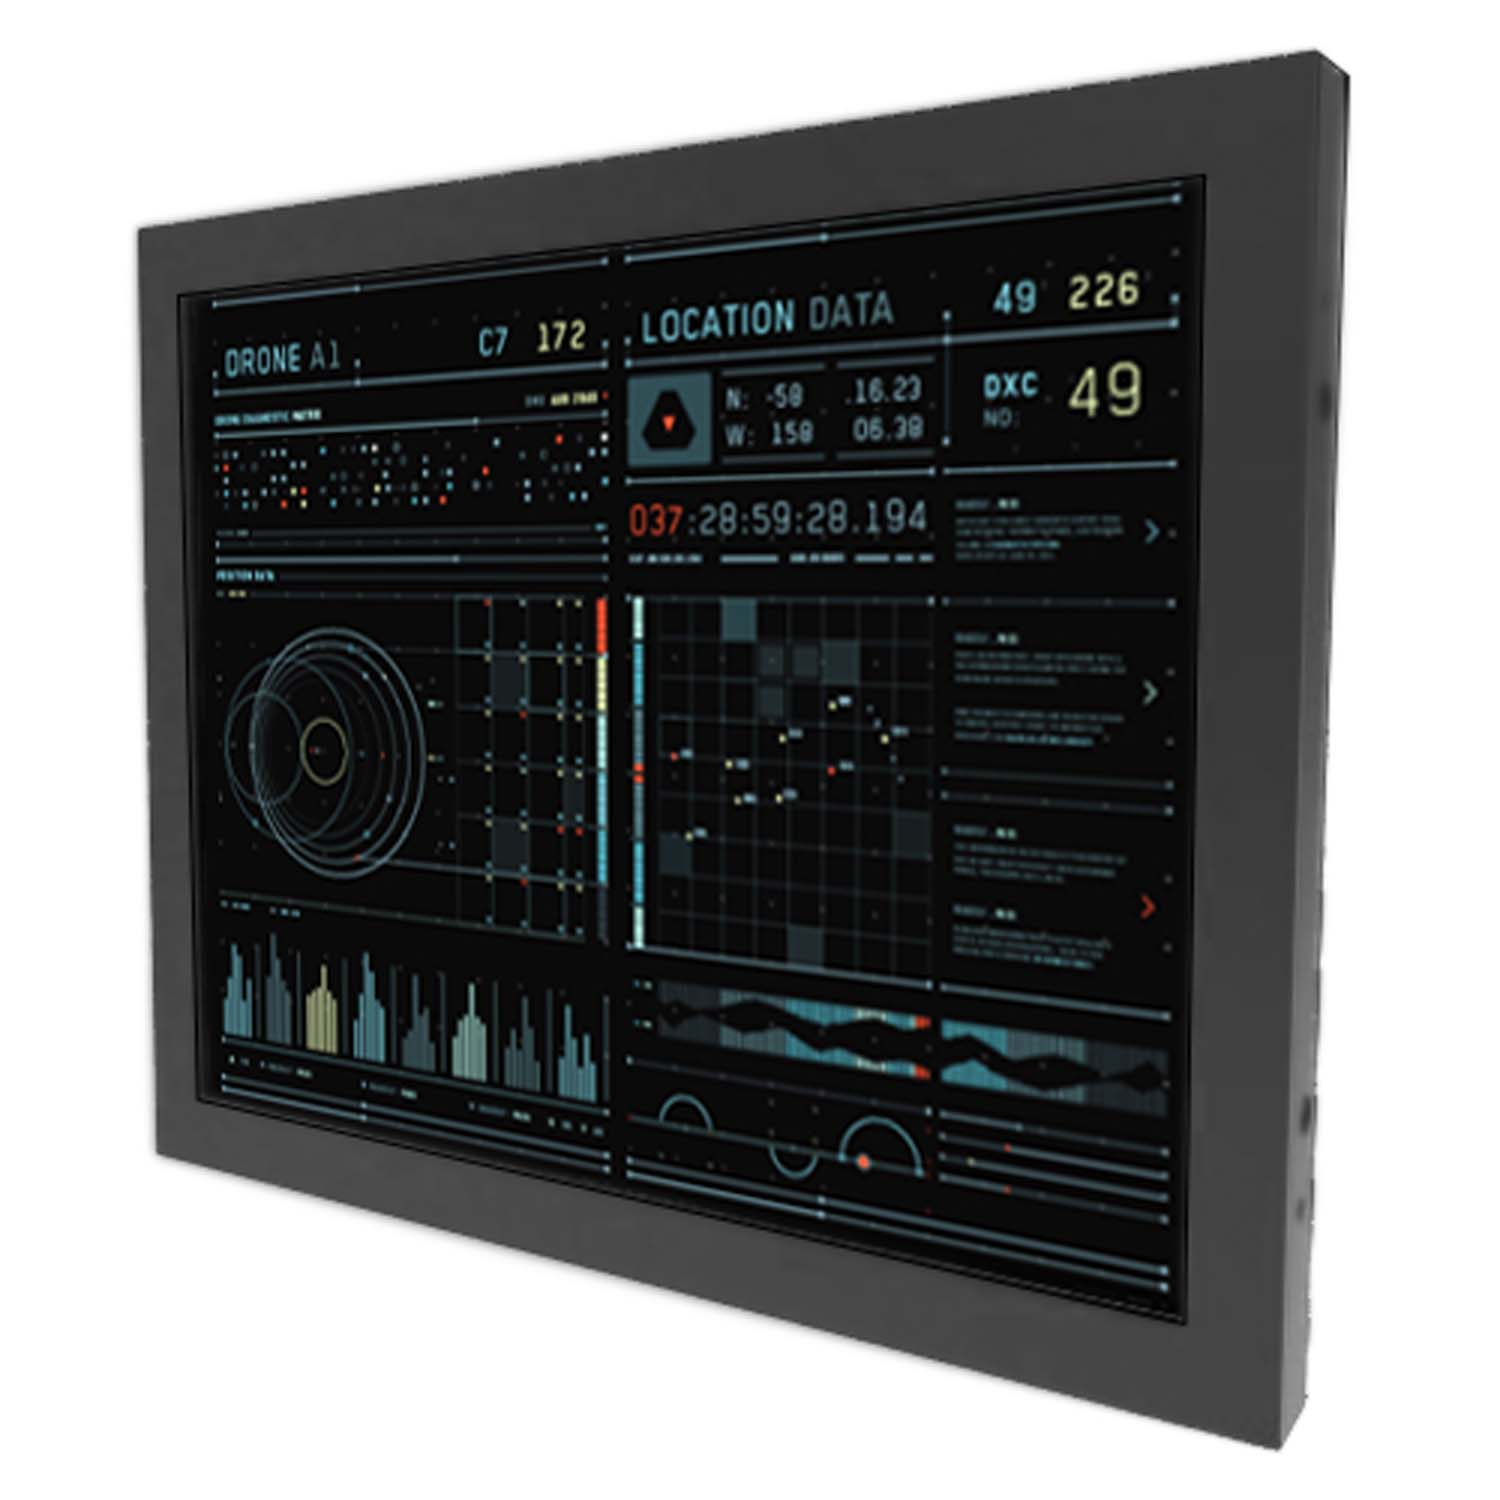 INDUSTRIAL TOUCH MONITOR KEETOUCH 15’’ OPEN FRAME KT-150-RP00001